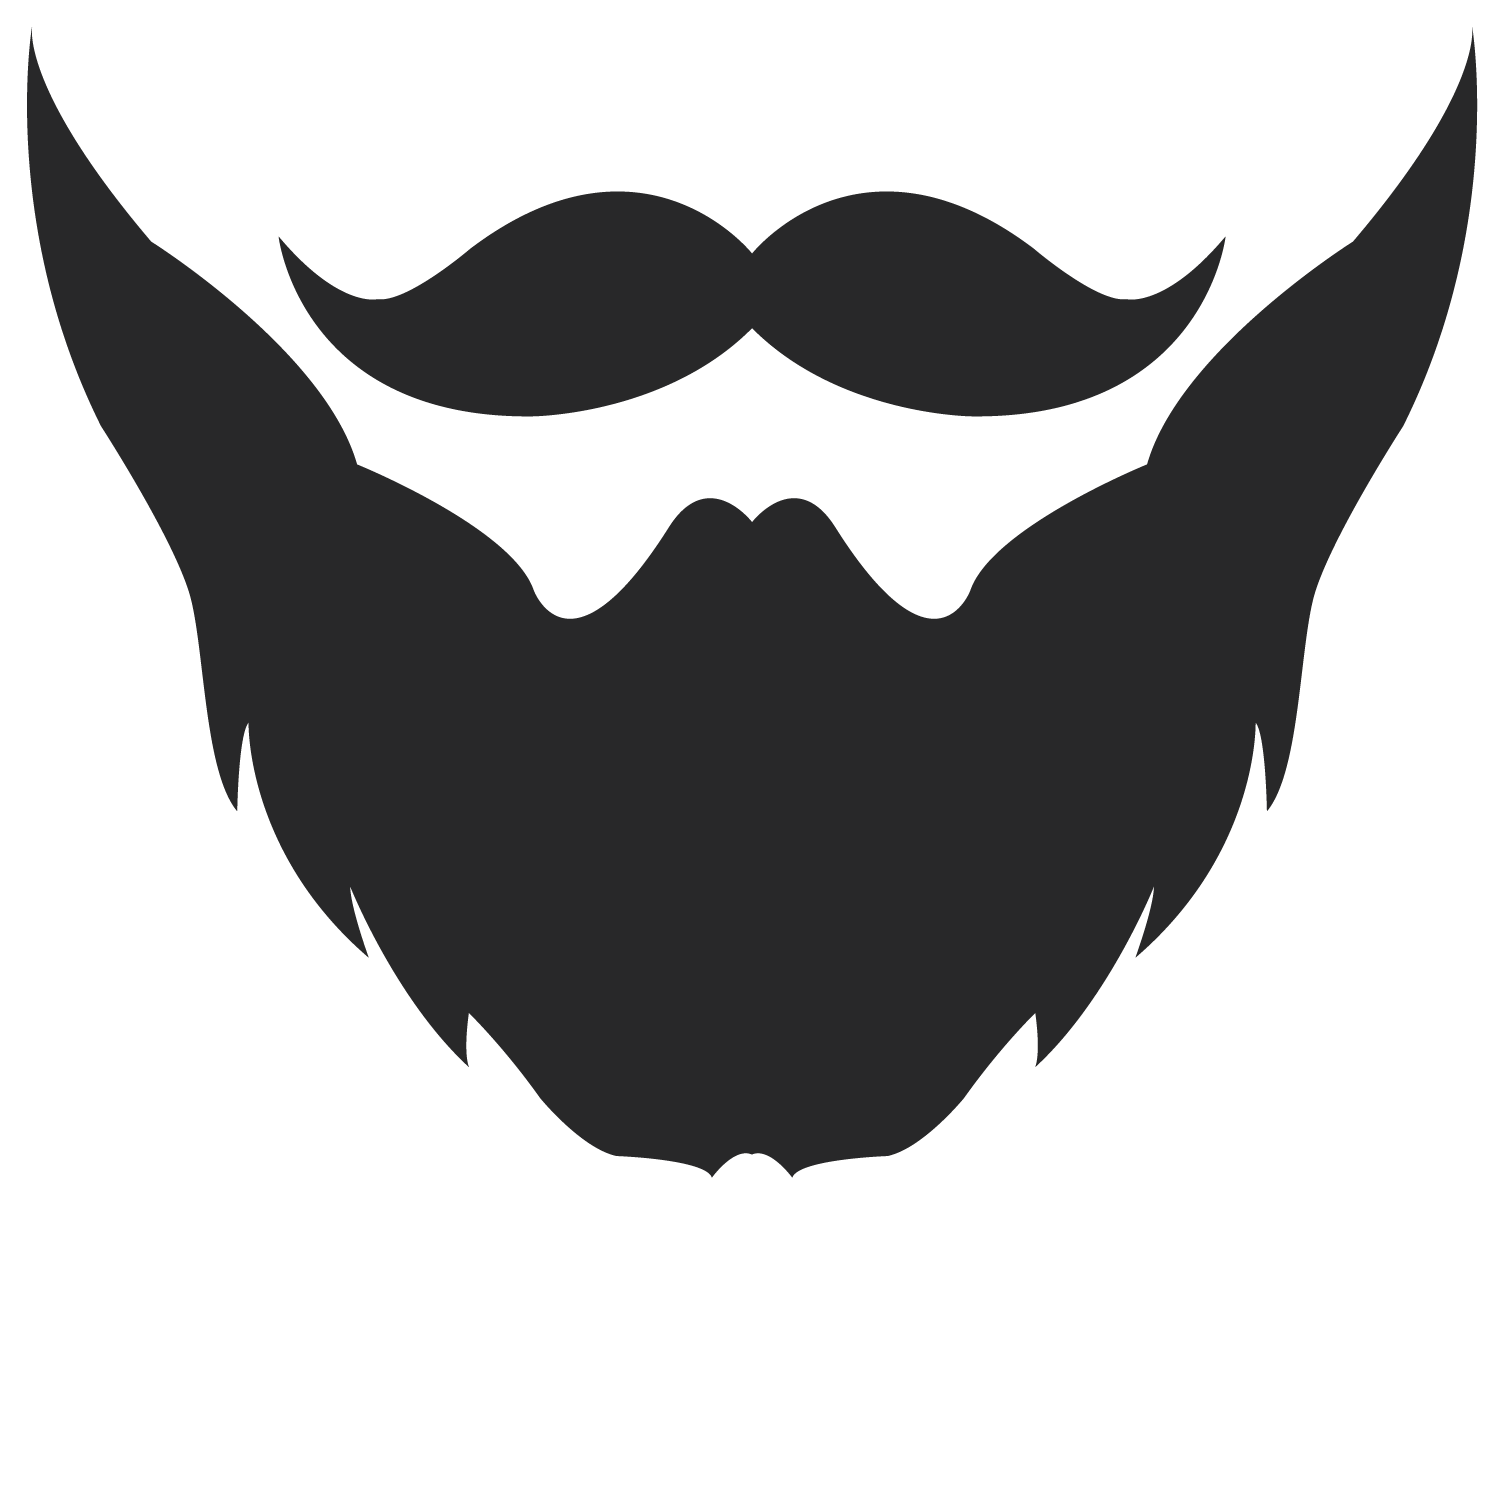 White bearded clipart - Clipground